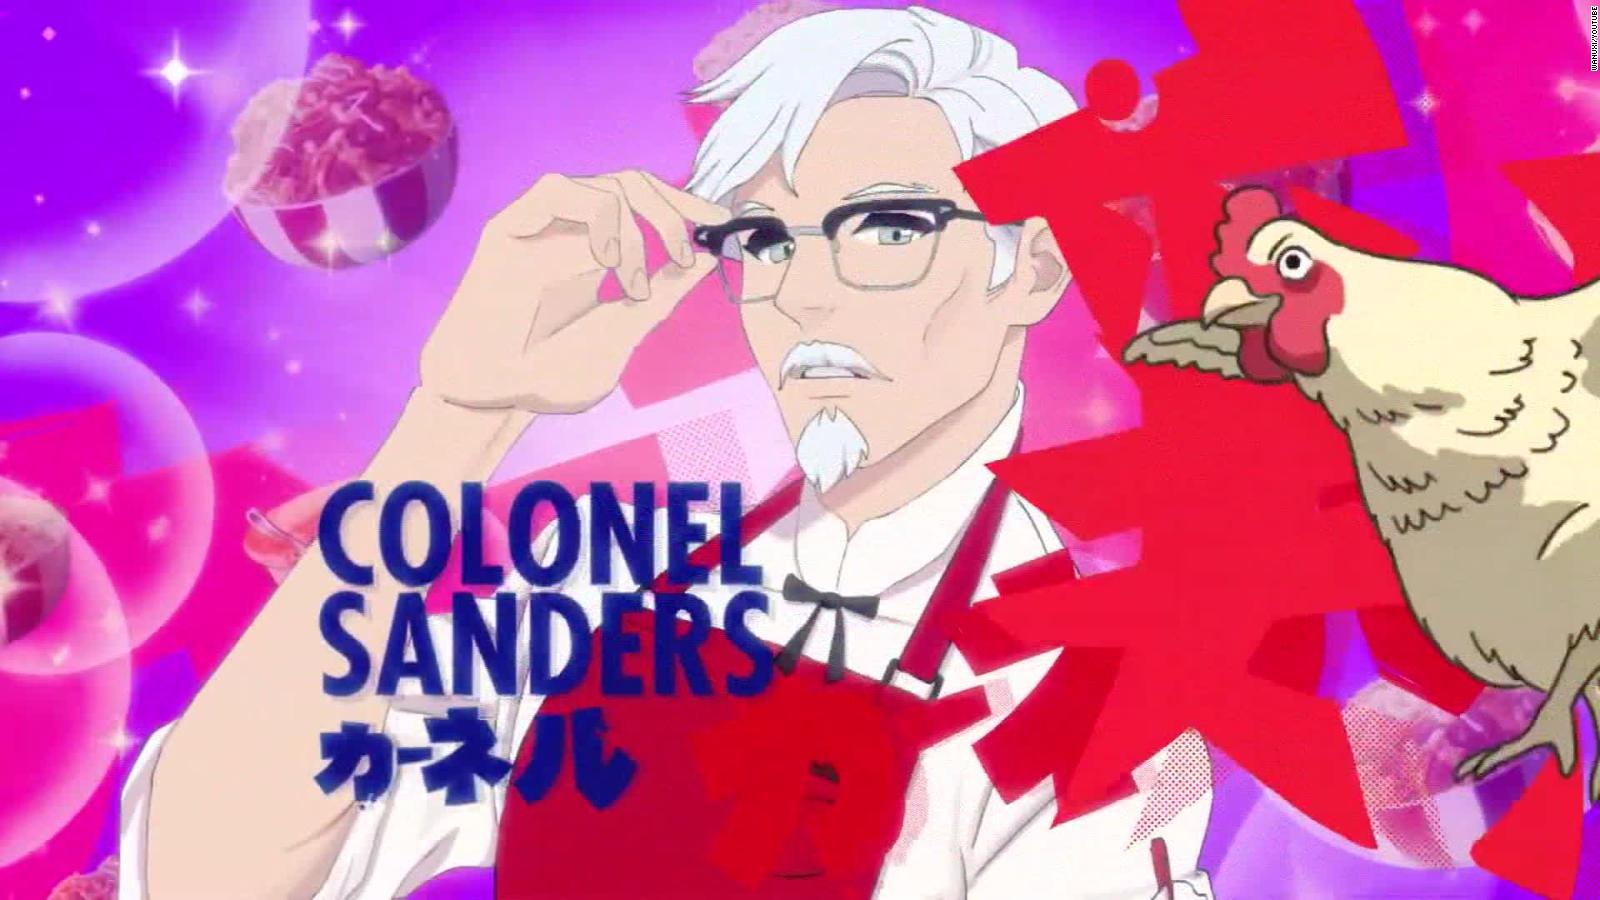 You can date Colonel Sanders in KFC's dating simulation